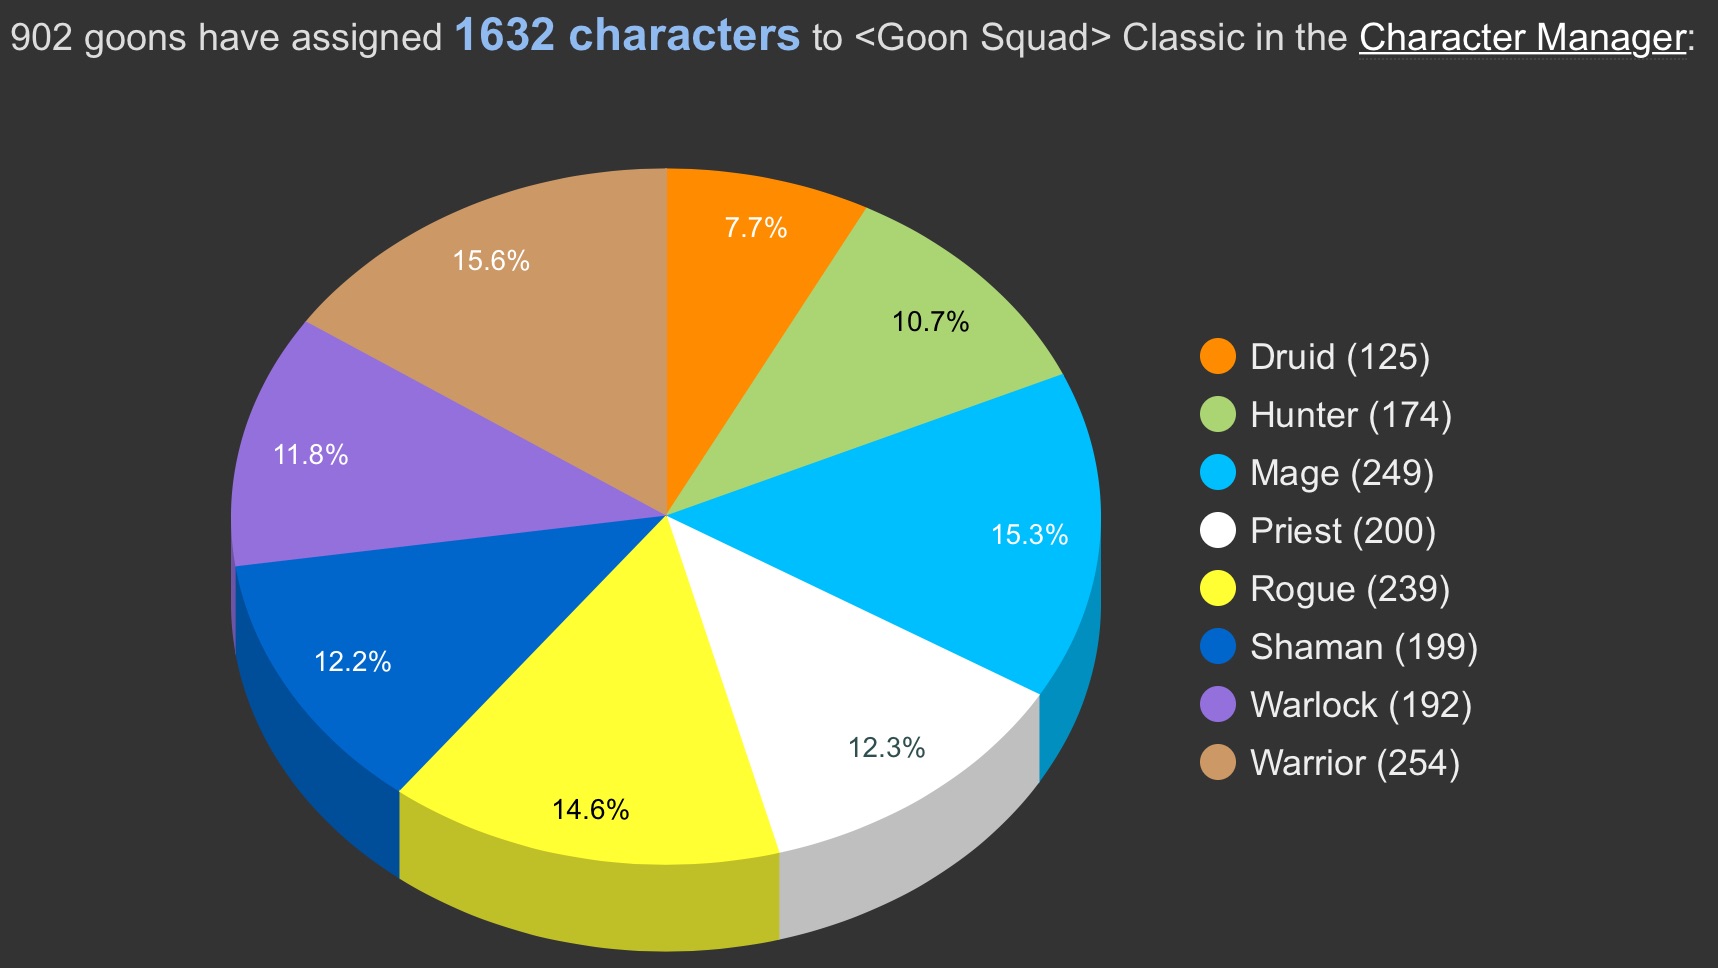 Pie chart showing the distribution of classes in Goon Squad Classic. Druid 7.7% (125), Hunter 10.7% (174), Warlock 11.8% (192), Shaman 12.2% (199), Priest 12.3% (200), Rogue 14.6% (239), Mage 15.3% (249), and Warrior 15.6% (254)